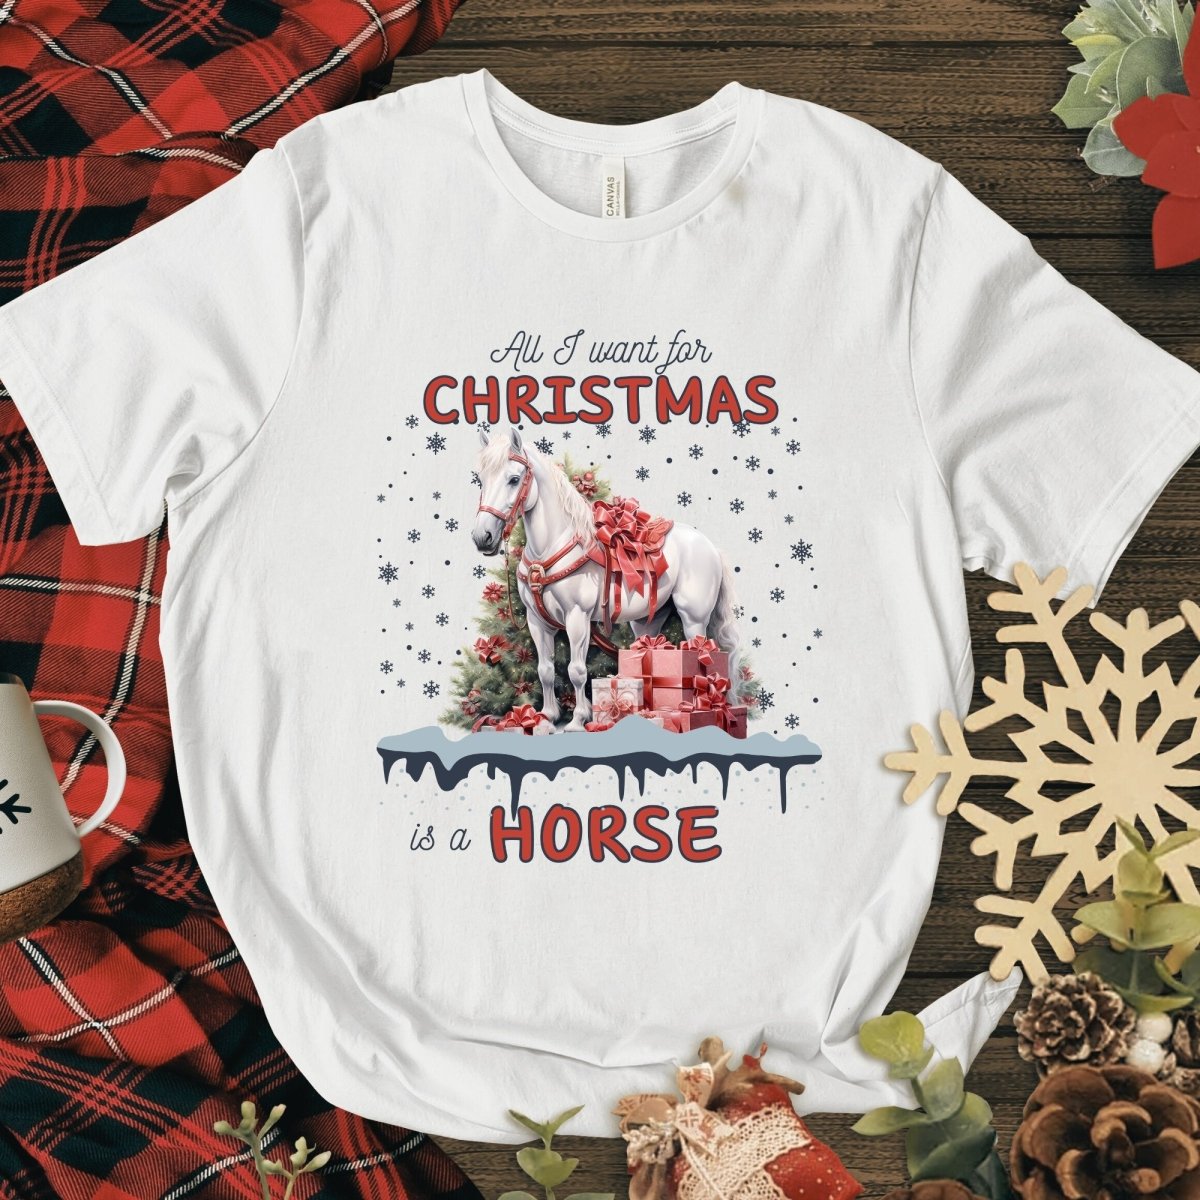 All I Want for Christmas is a Horse T-Shirt - High Quality Funny Horse Shirt, Funny Gift for Horse Lover, Christmas Holiday Tee - Everything Pixel